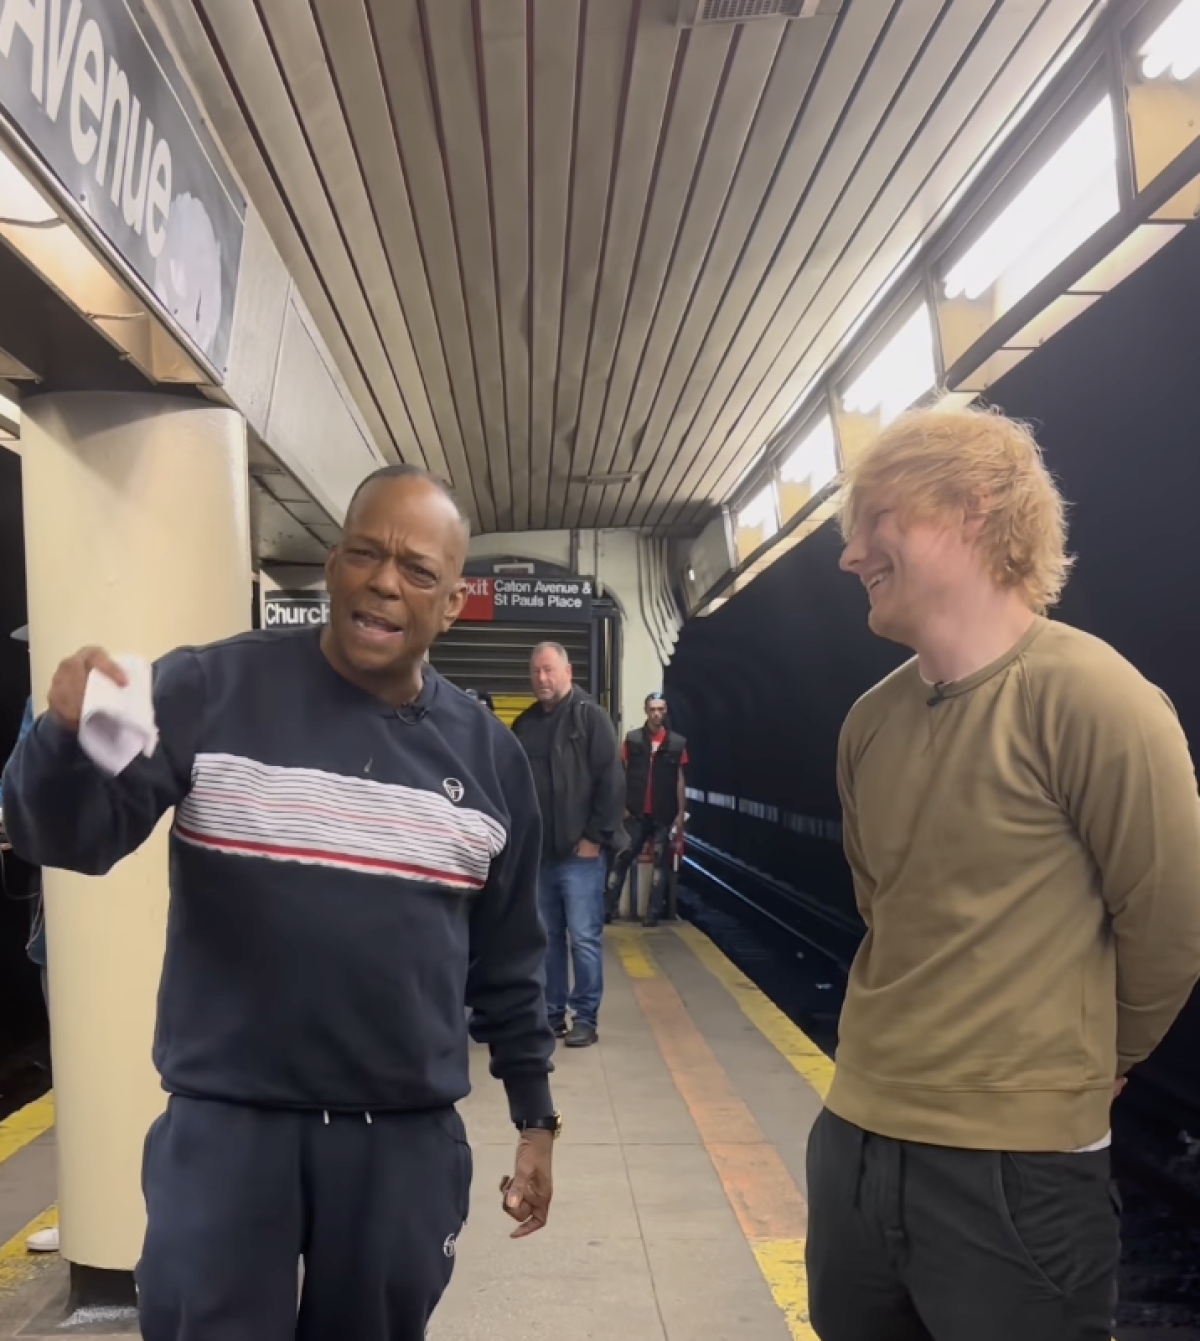 On a subway platform, Mike Yung holds a sheet of paper with lyrics and sings alongside Ed Sheeran